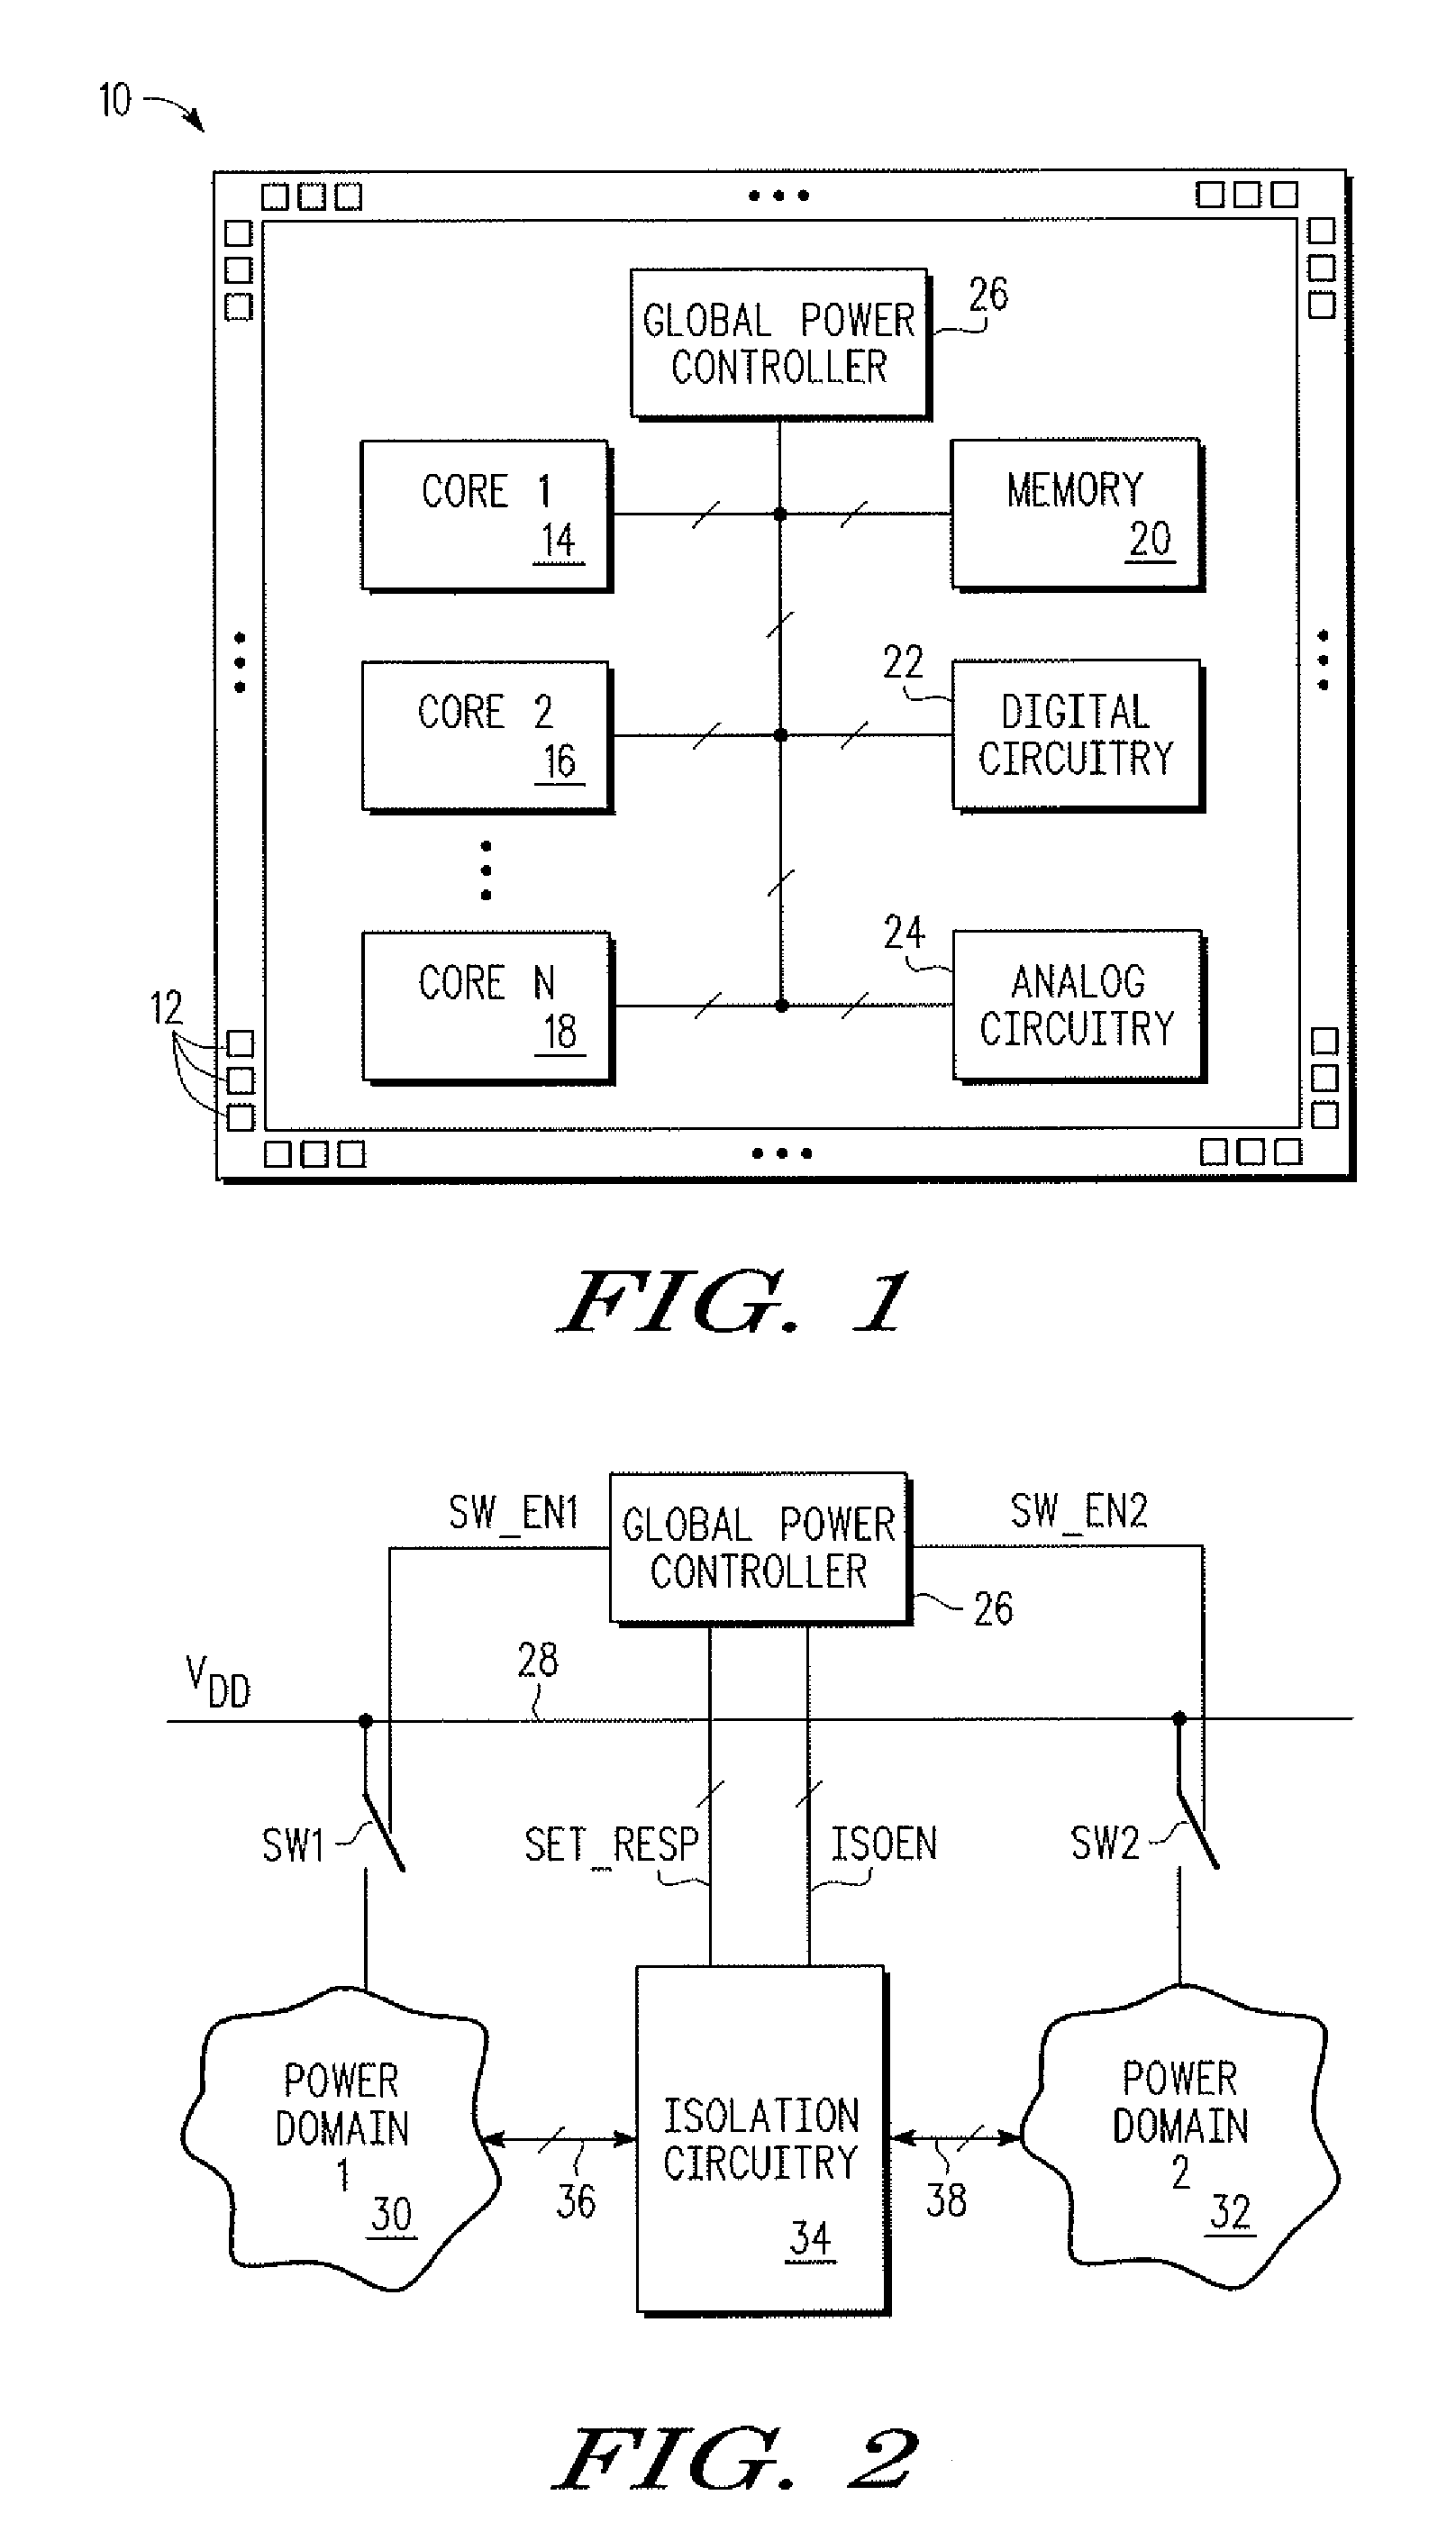 Management of power domains in an integrated circuit